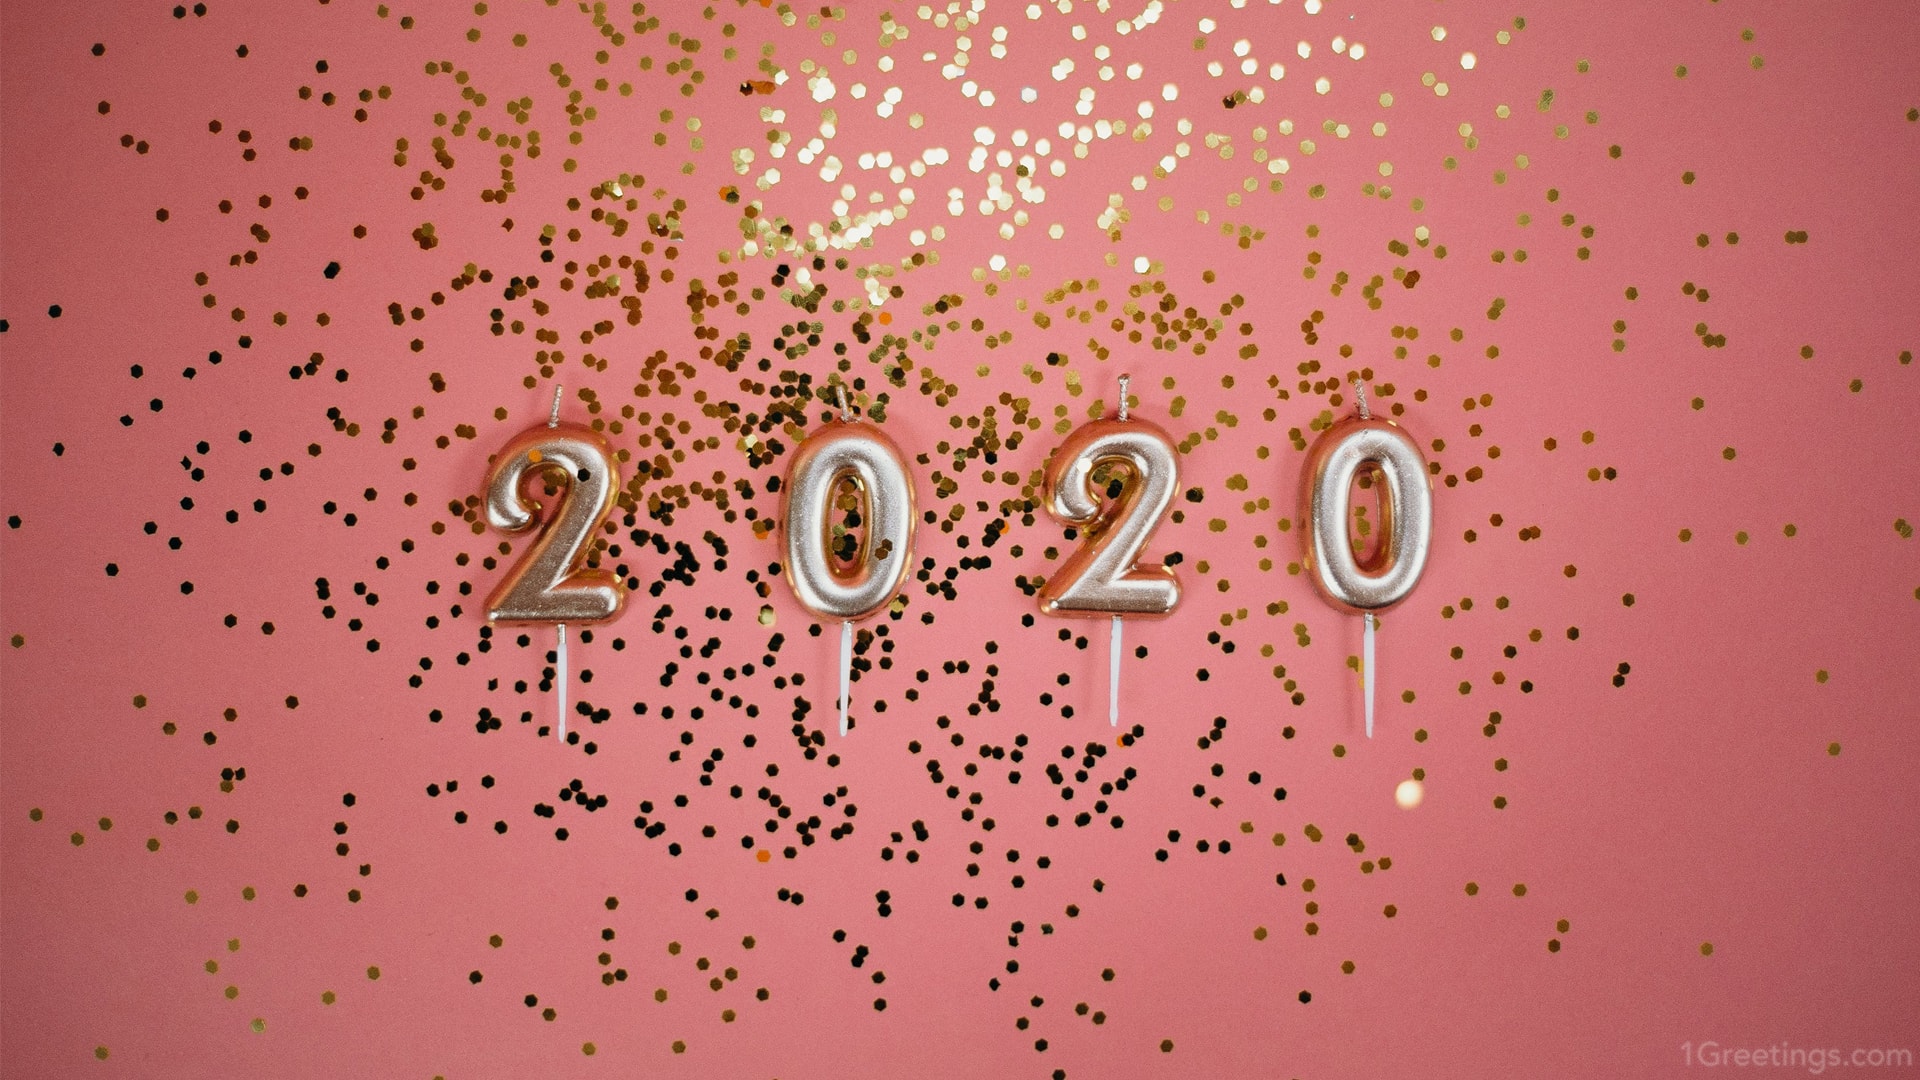 The most popular happy new year wallpapers 2020